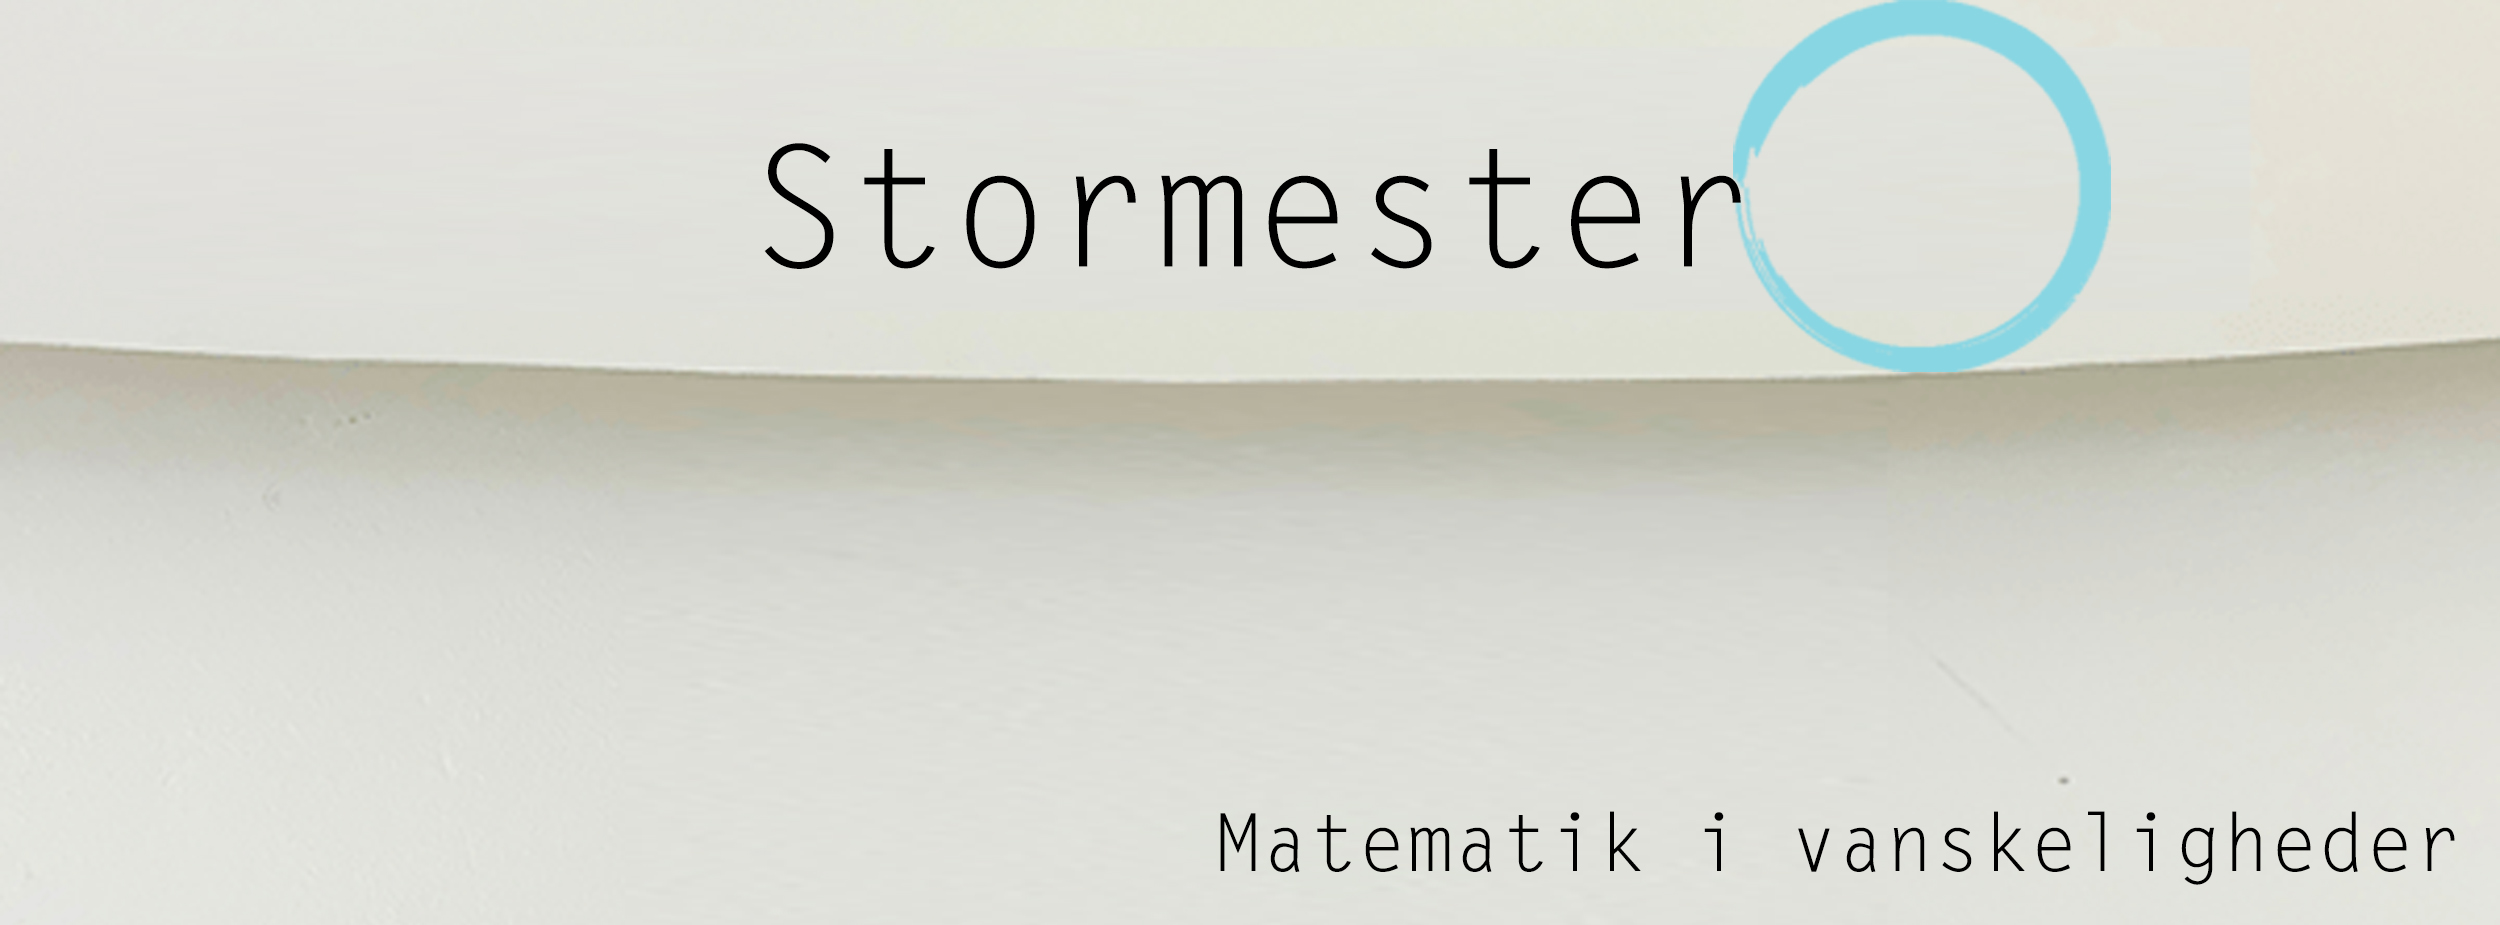 Stormester Cover ny